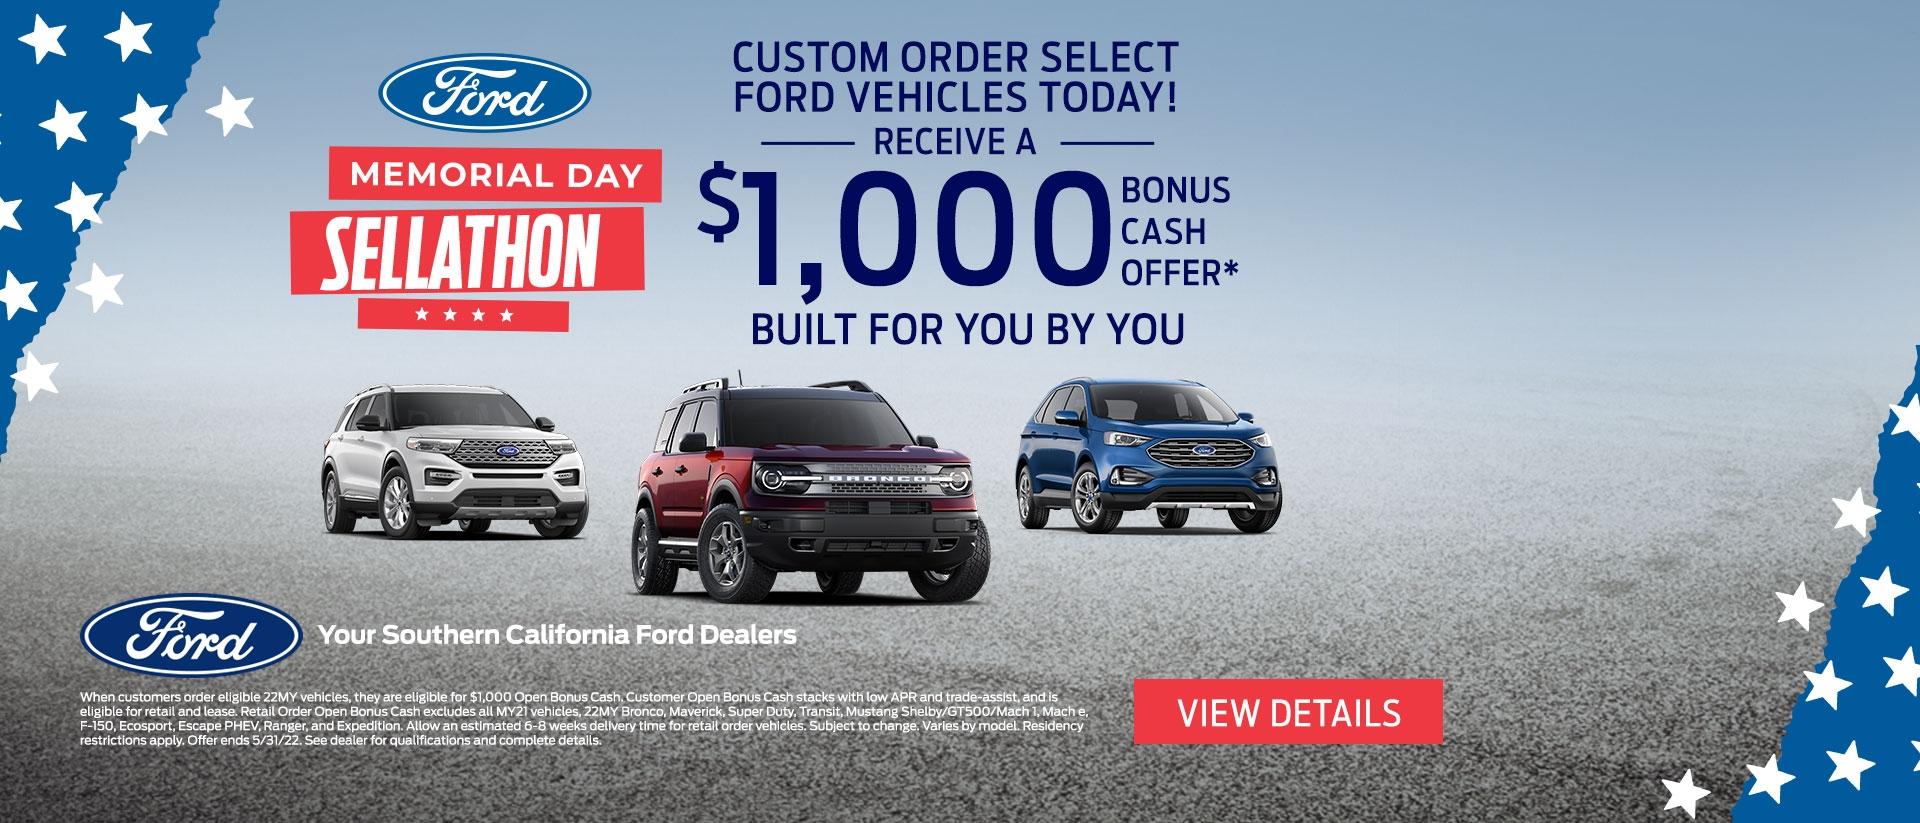 Ford Memorial Day Sellathon | Custom Order Your New Ford Your Way | Southern California Ford Dealers